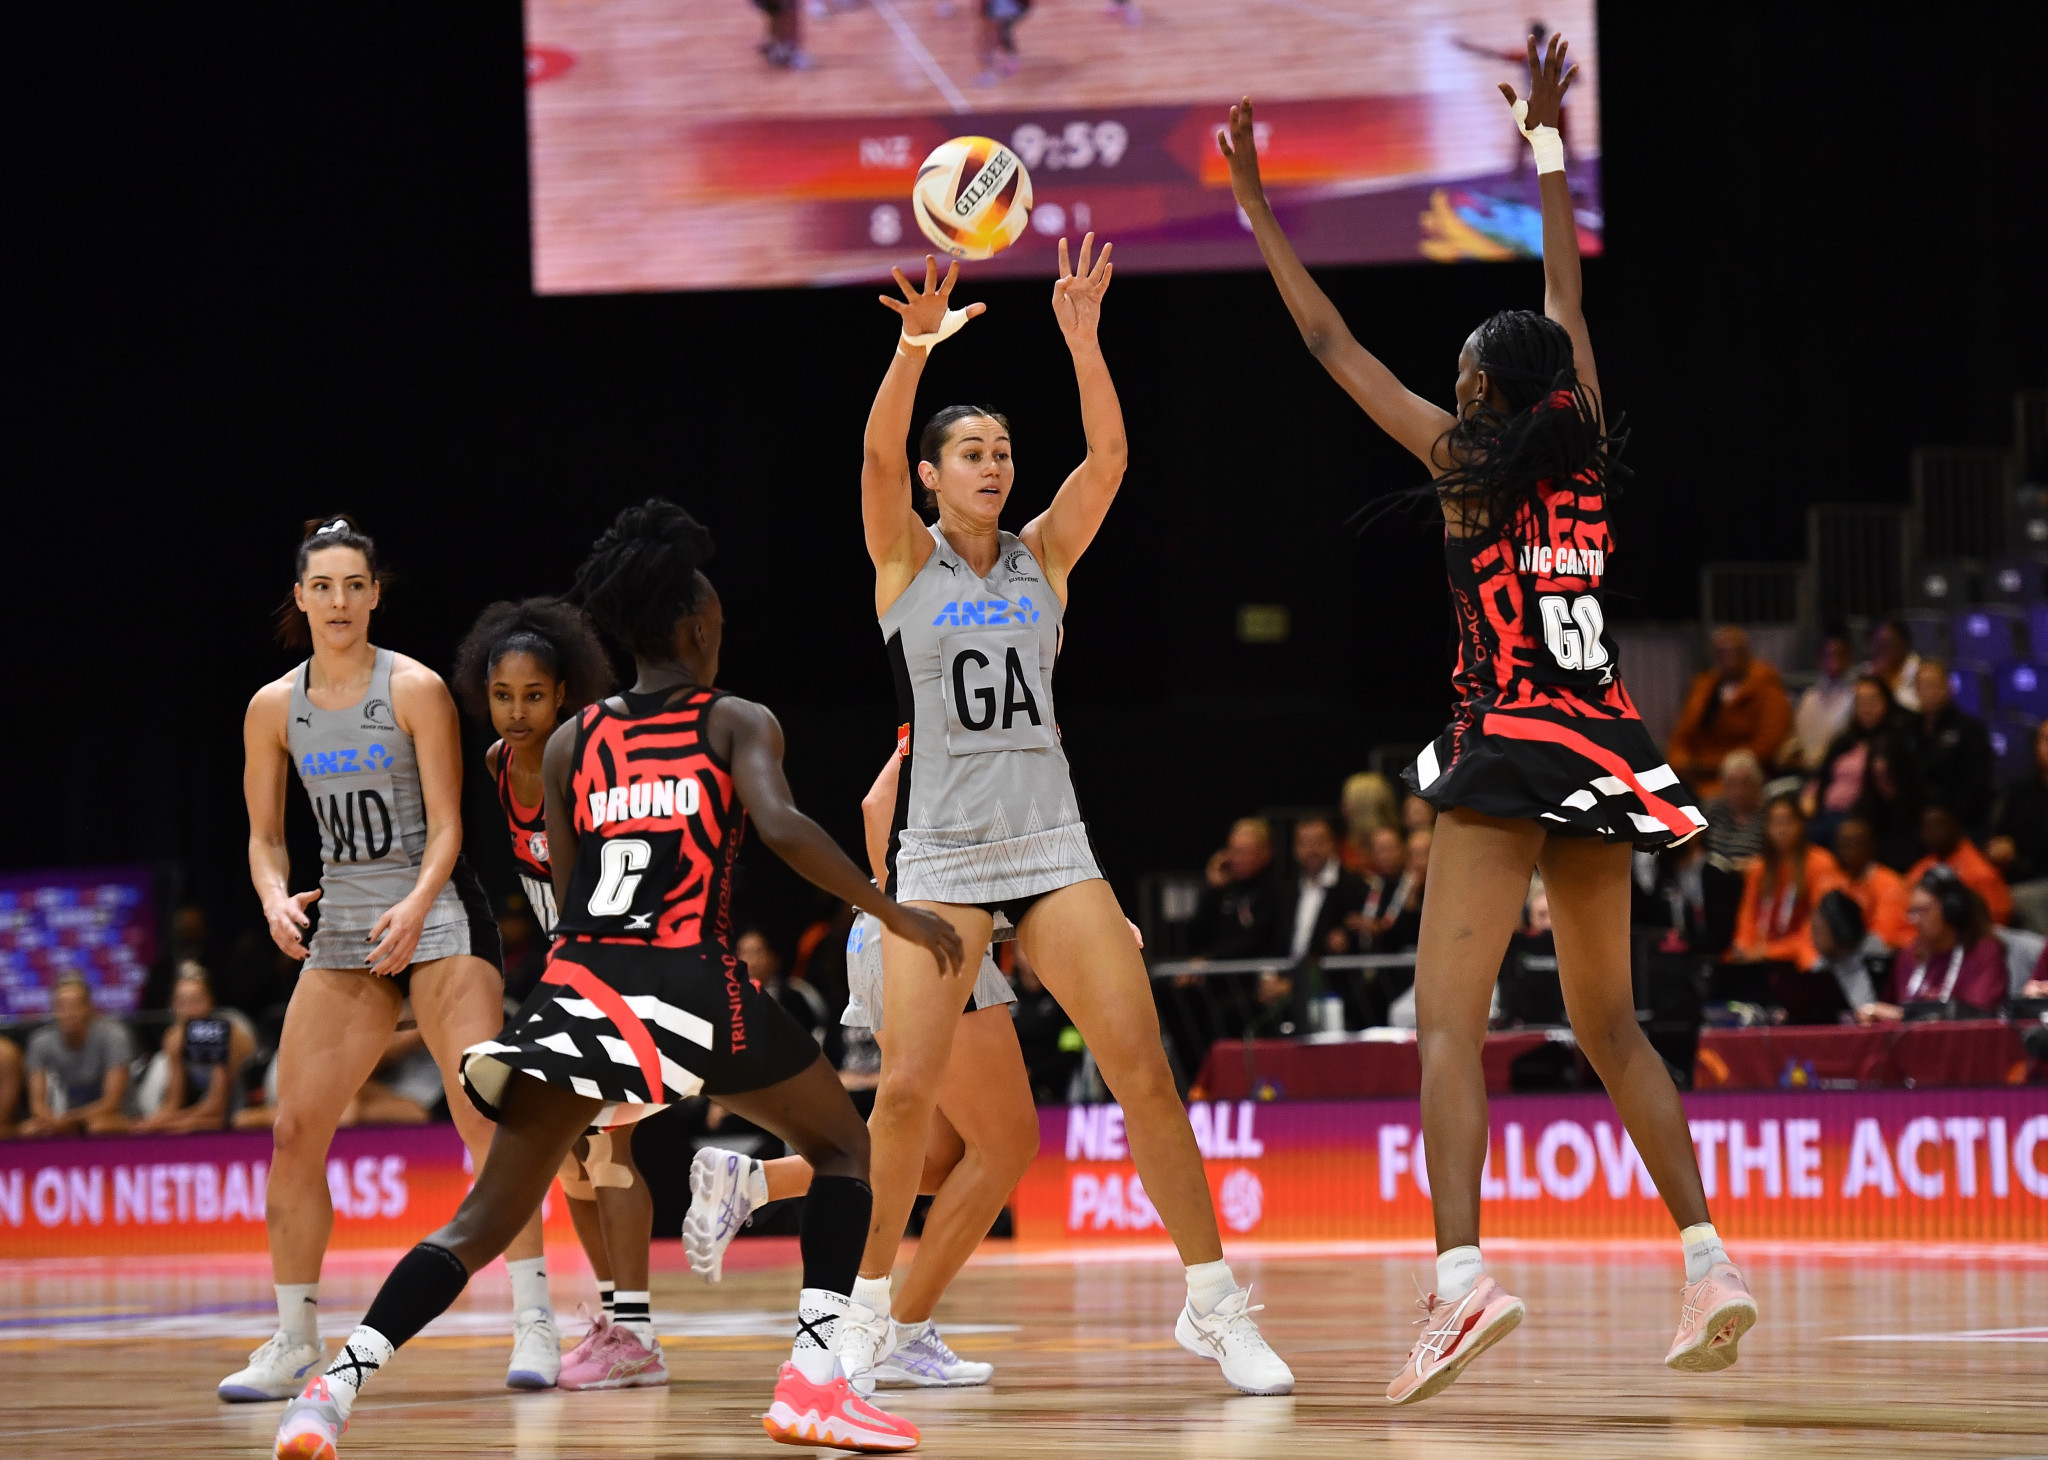 Defending champions New Zealand started the Netball World Cup with a 76-27 victory against Trinidad and Tobago ©Getty Images